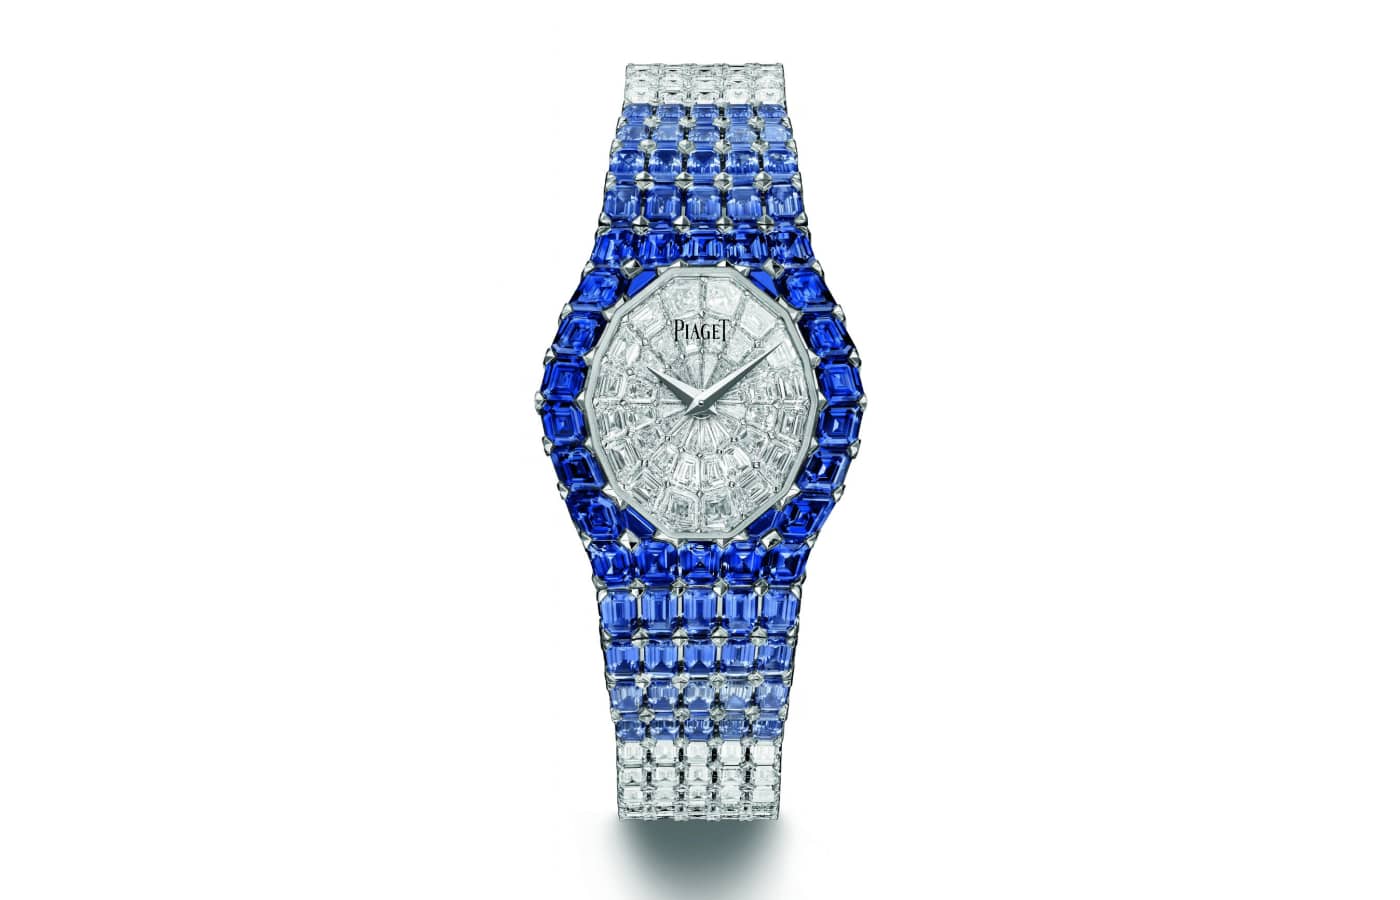 Piaget Limelight Aura High Jewellery watch in white gold, sapphire and diamond